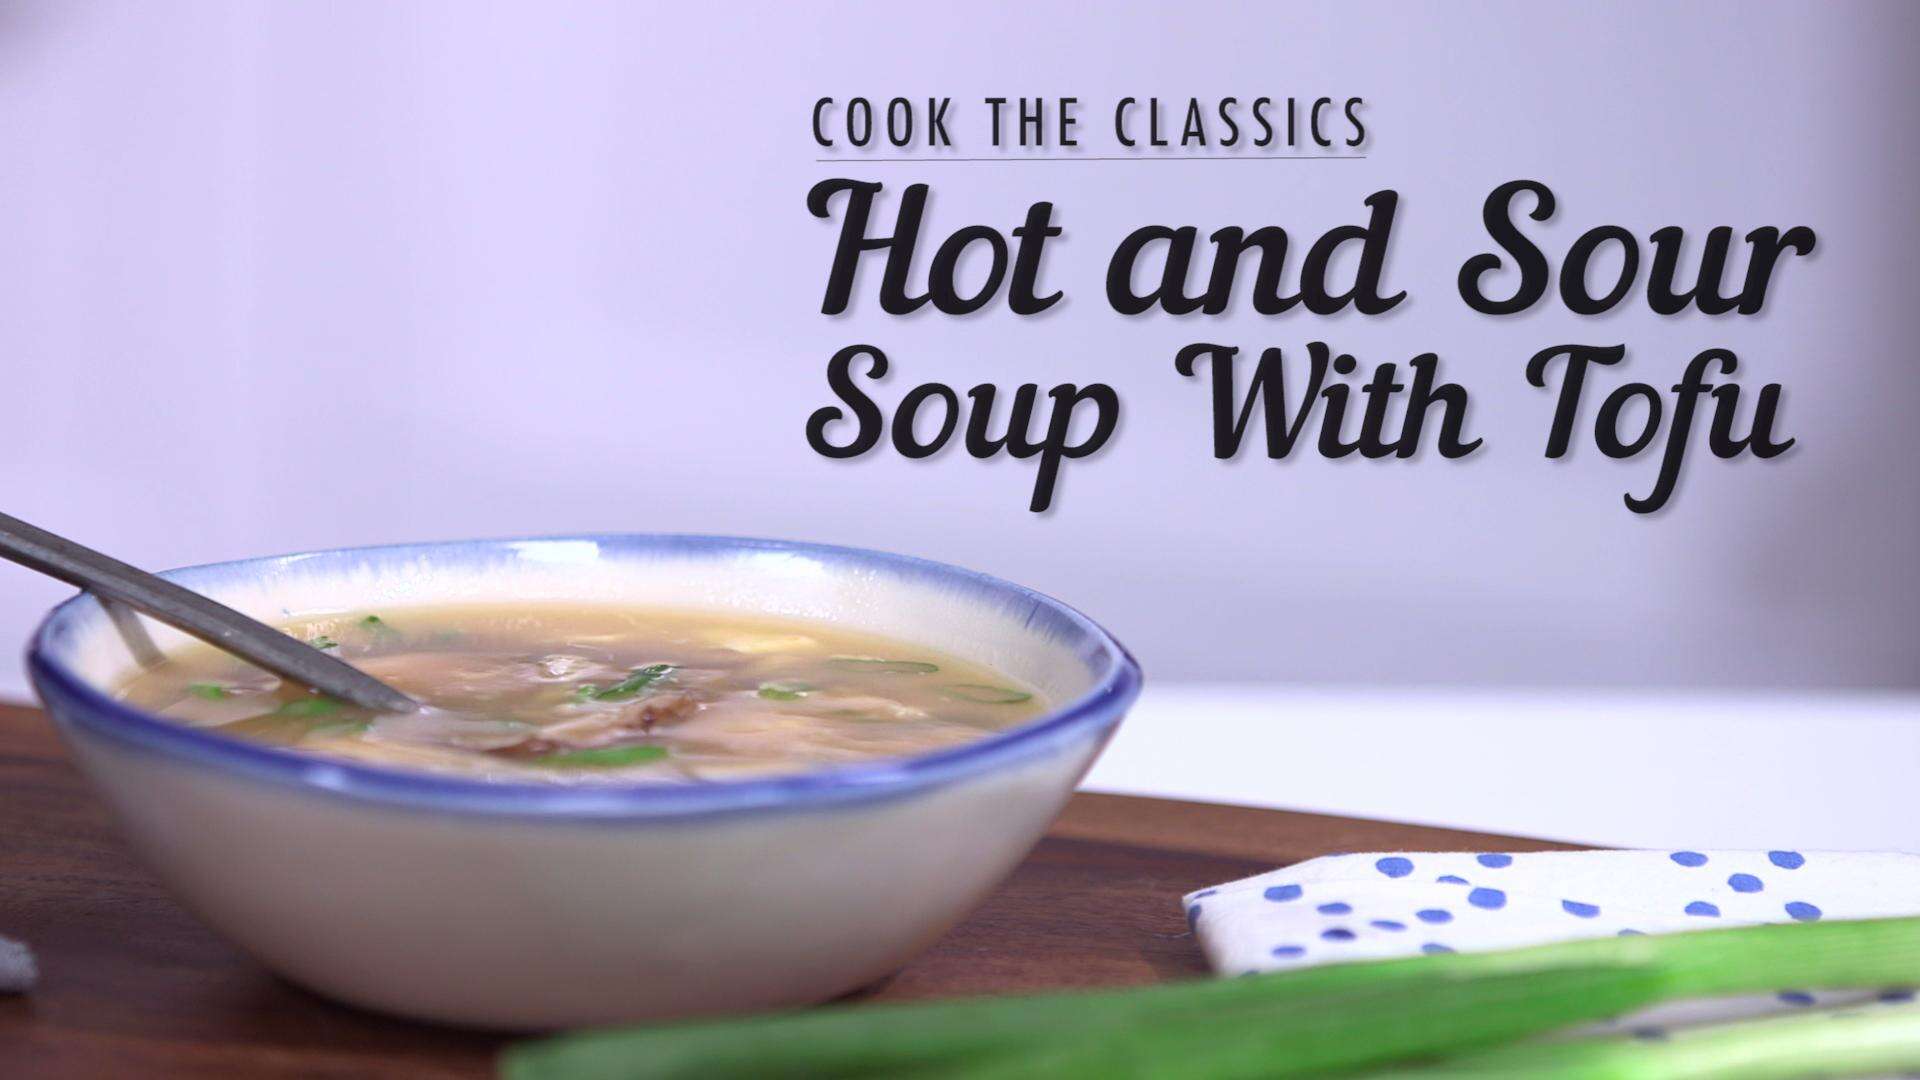 How to Make Classic Hot and Sour Soup with Tofu